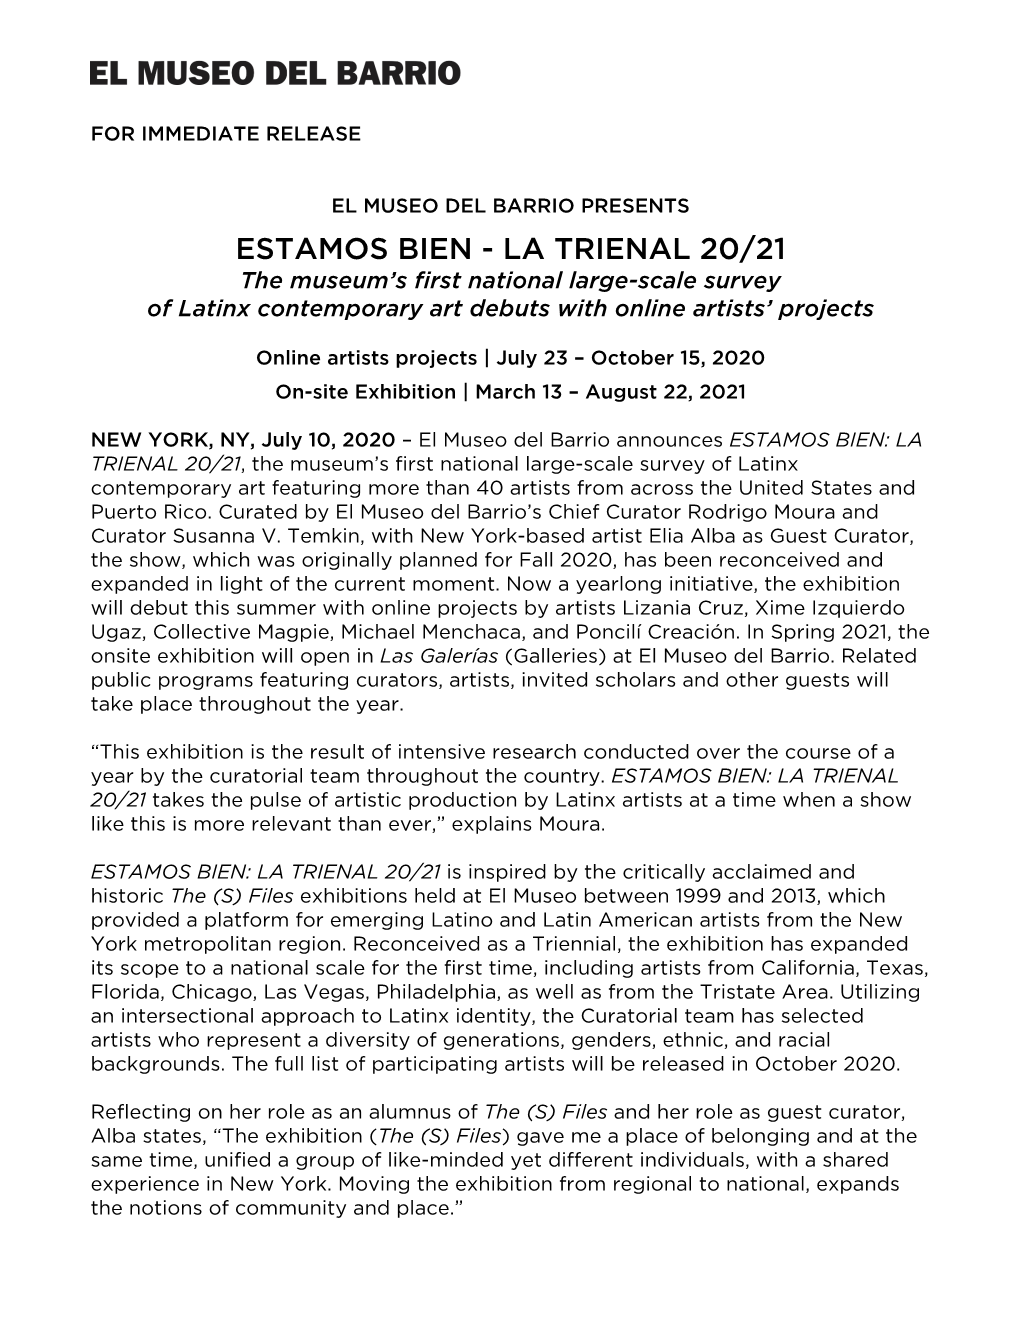 ESTAMOS BIEN - LA TRIENAL 20/21 the Museum’S First National Large-Scale Survey of Latinx Contemporary Art Debuts with Online Artists’ Projects